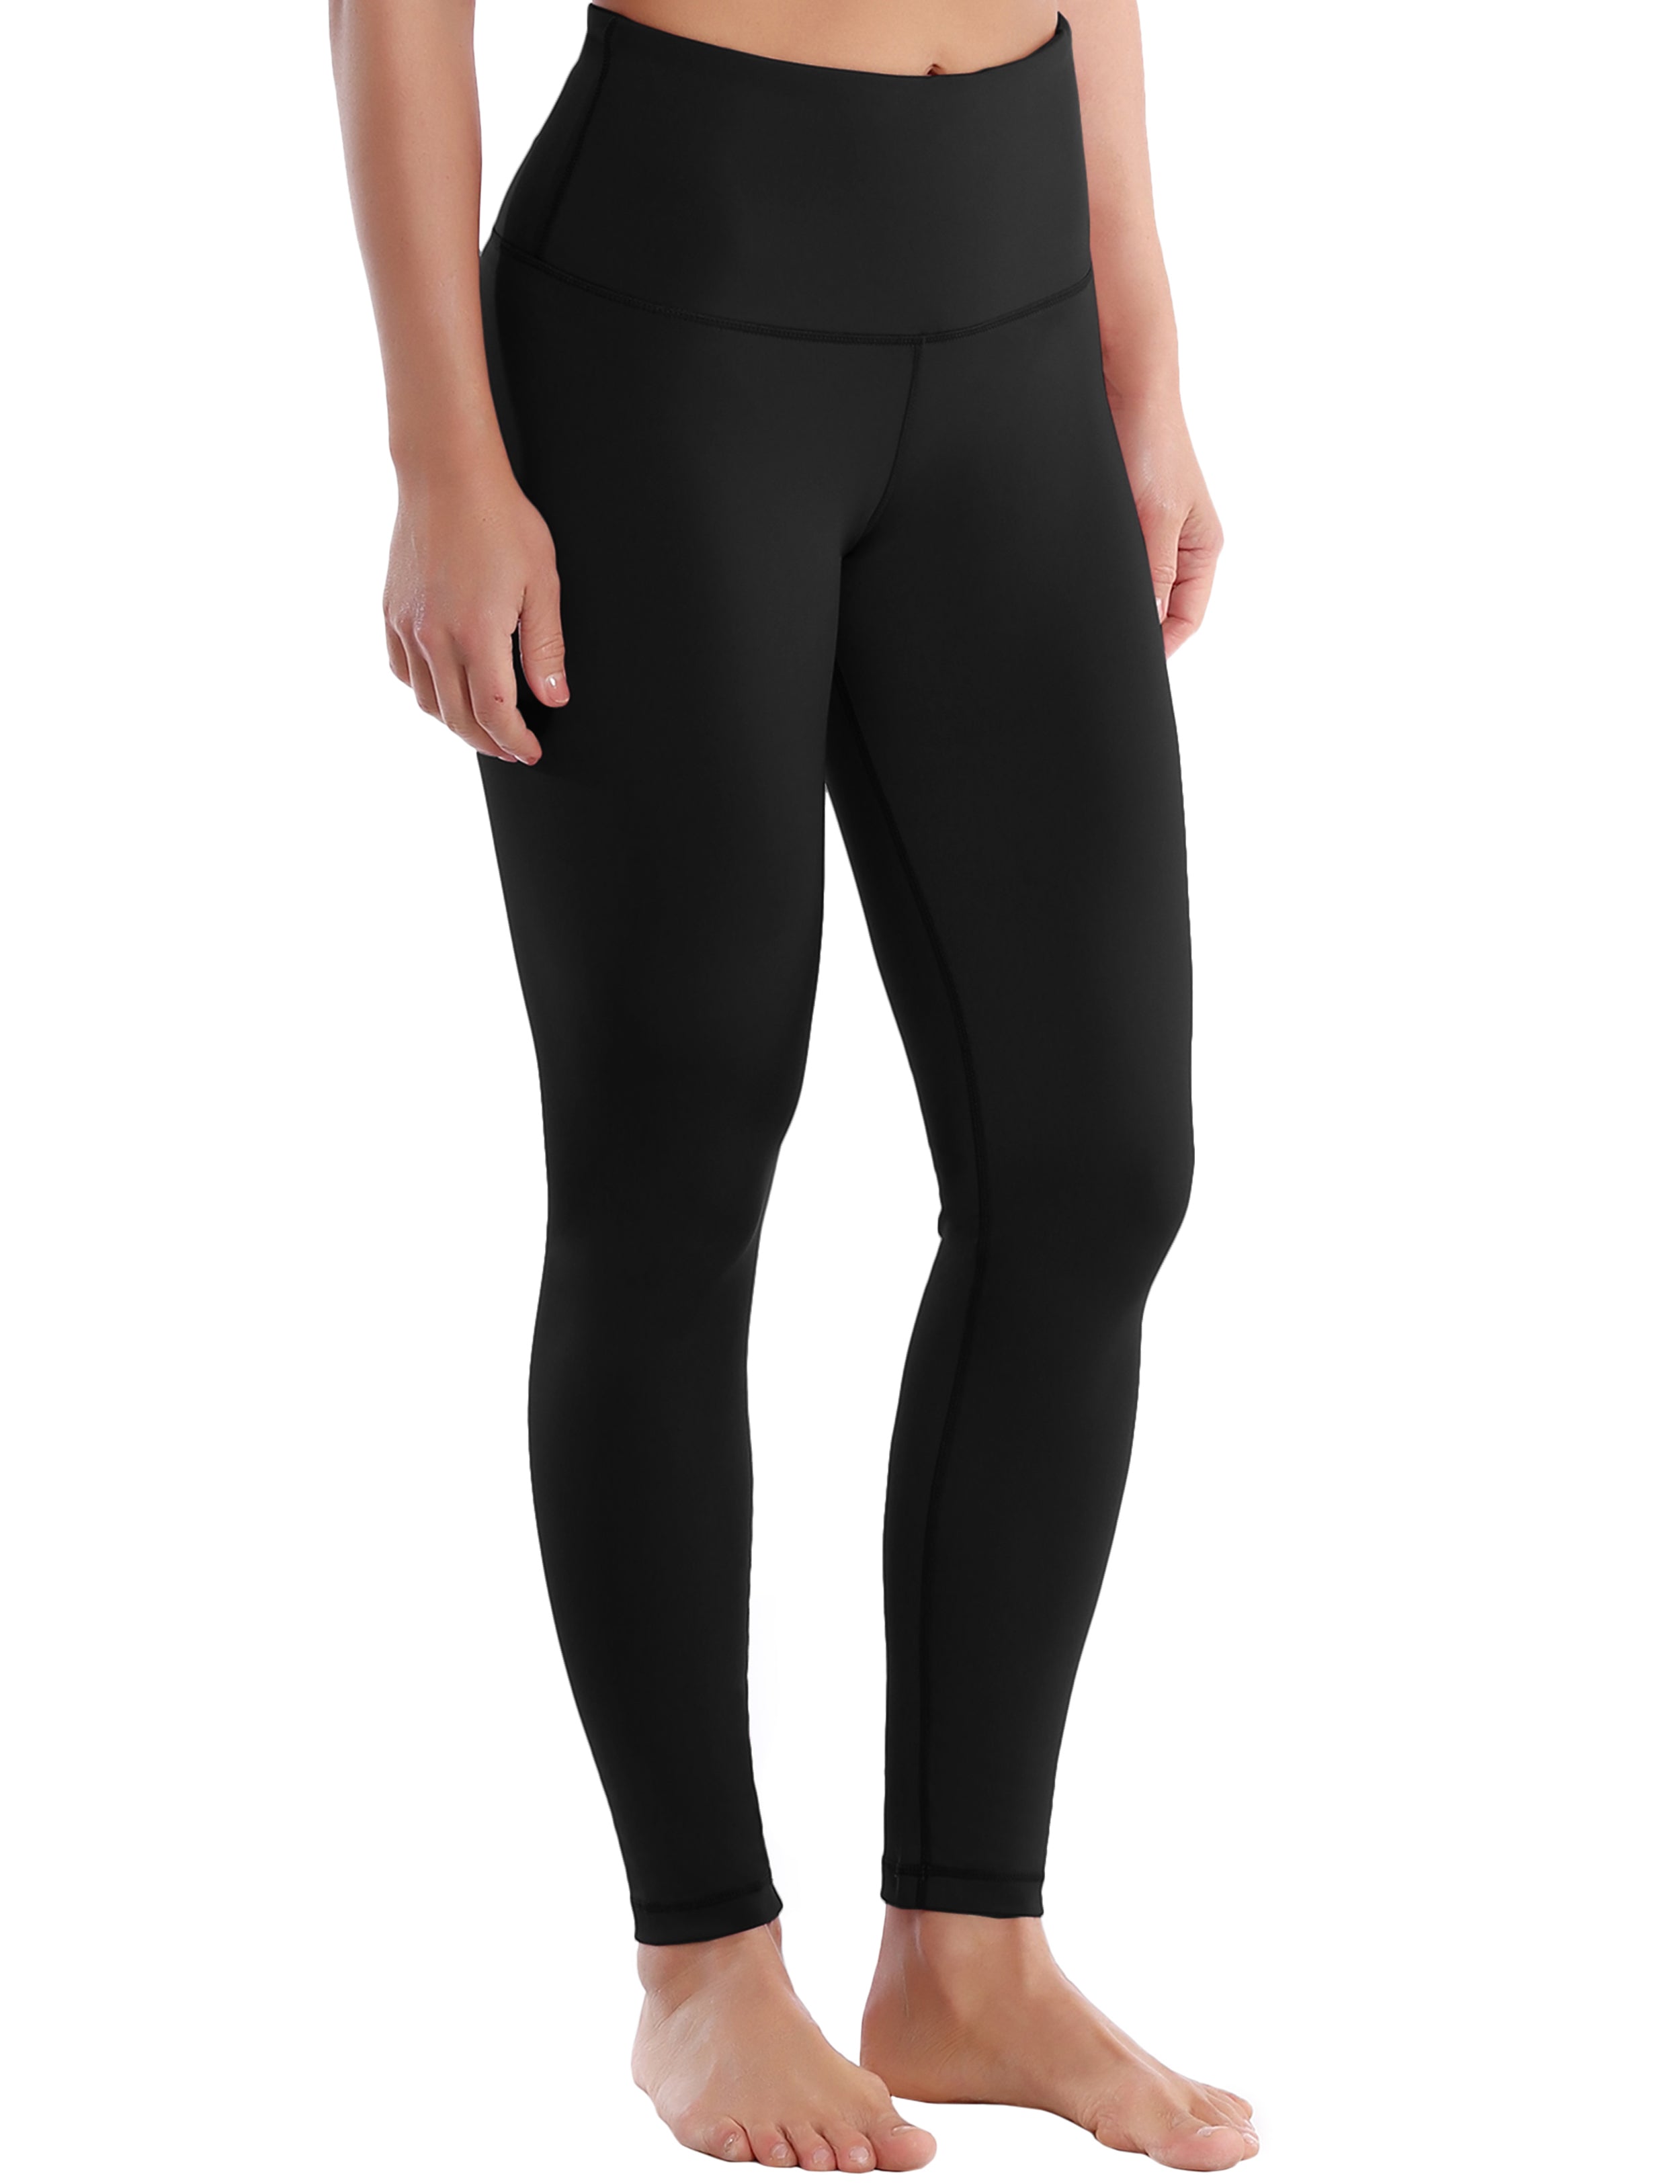 High Waist Biking Pants black 75%Nylon/25%Spandex Fabric doesn't attract lint easily 4-way stretch No see-through Moisture-wicking Tummy control Inner pocket Four lengths